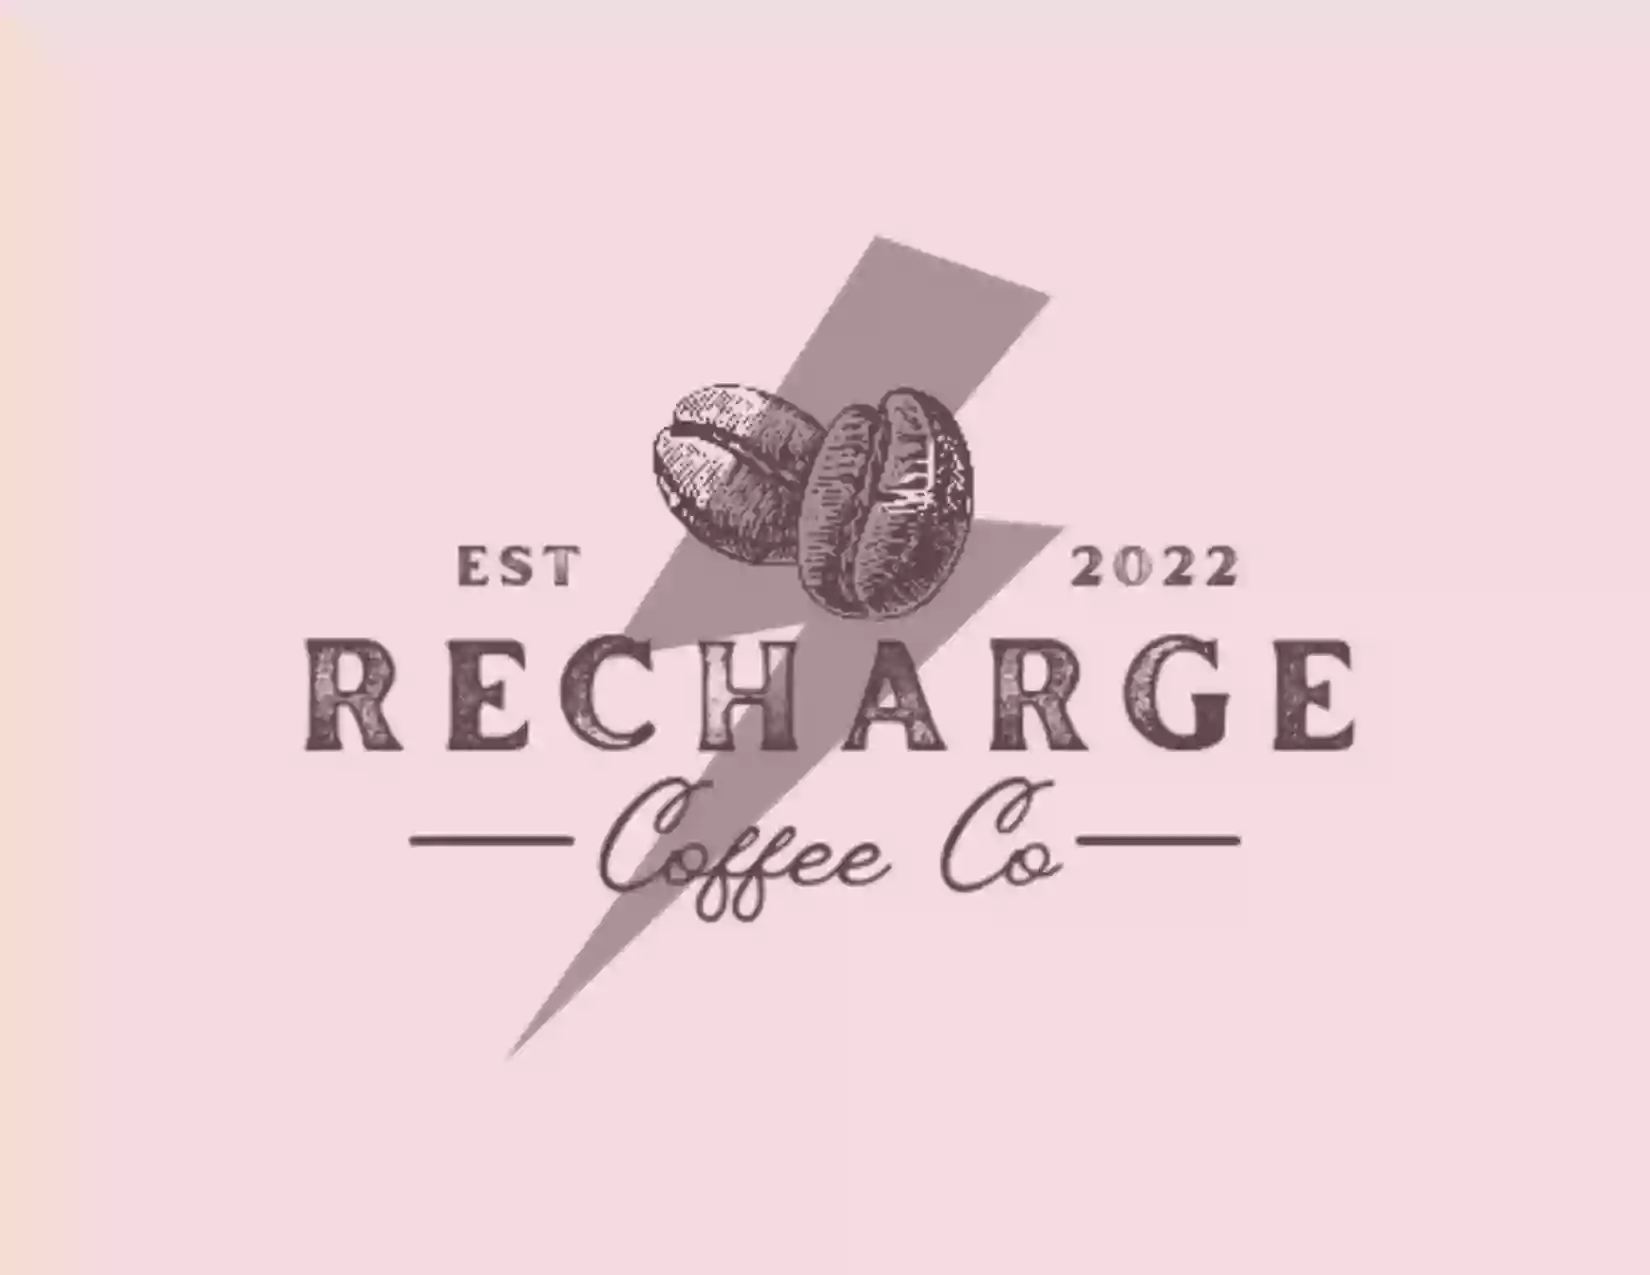 Recharge Coffee Co